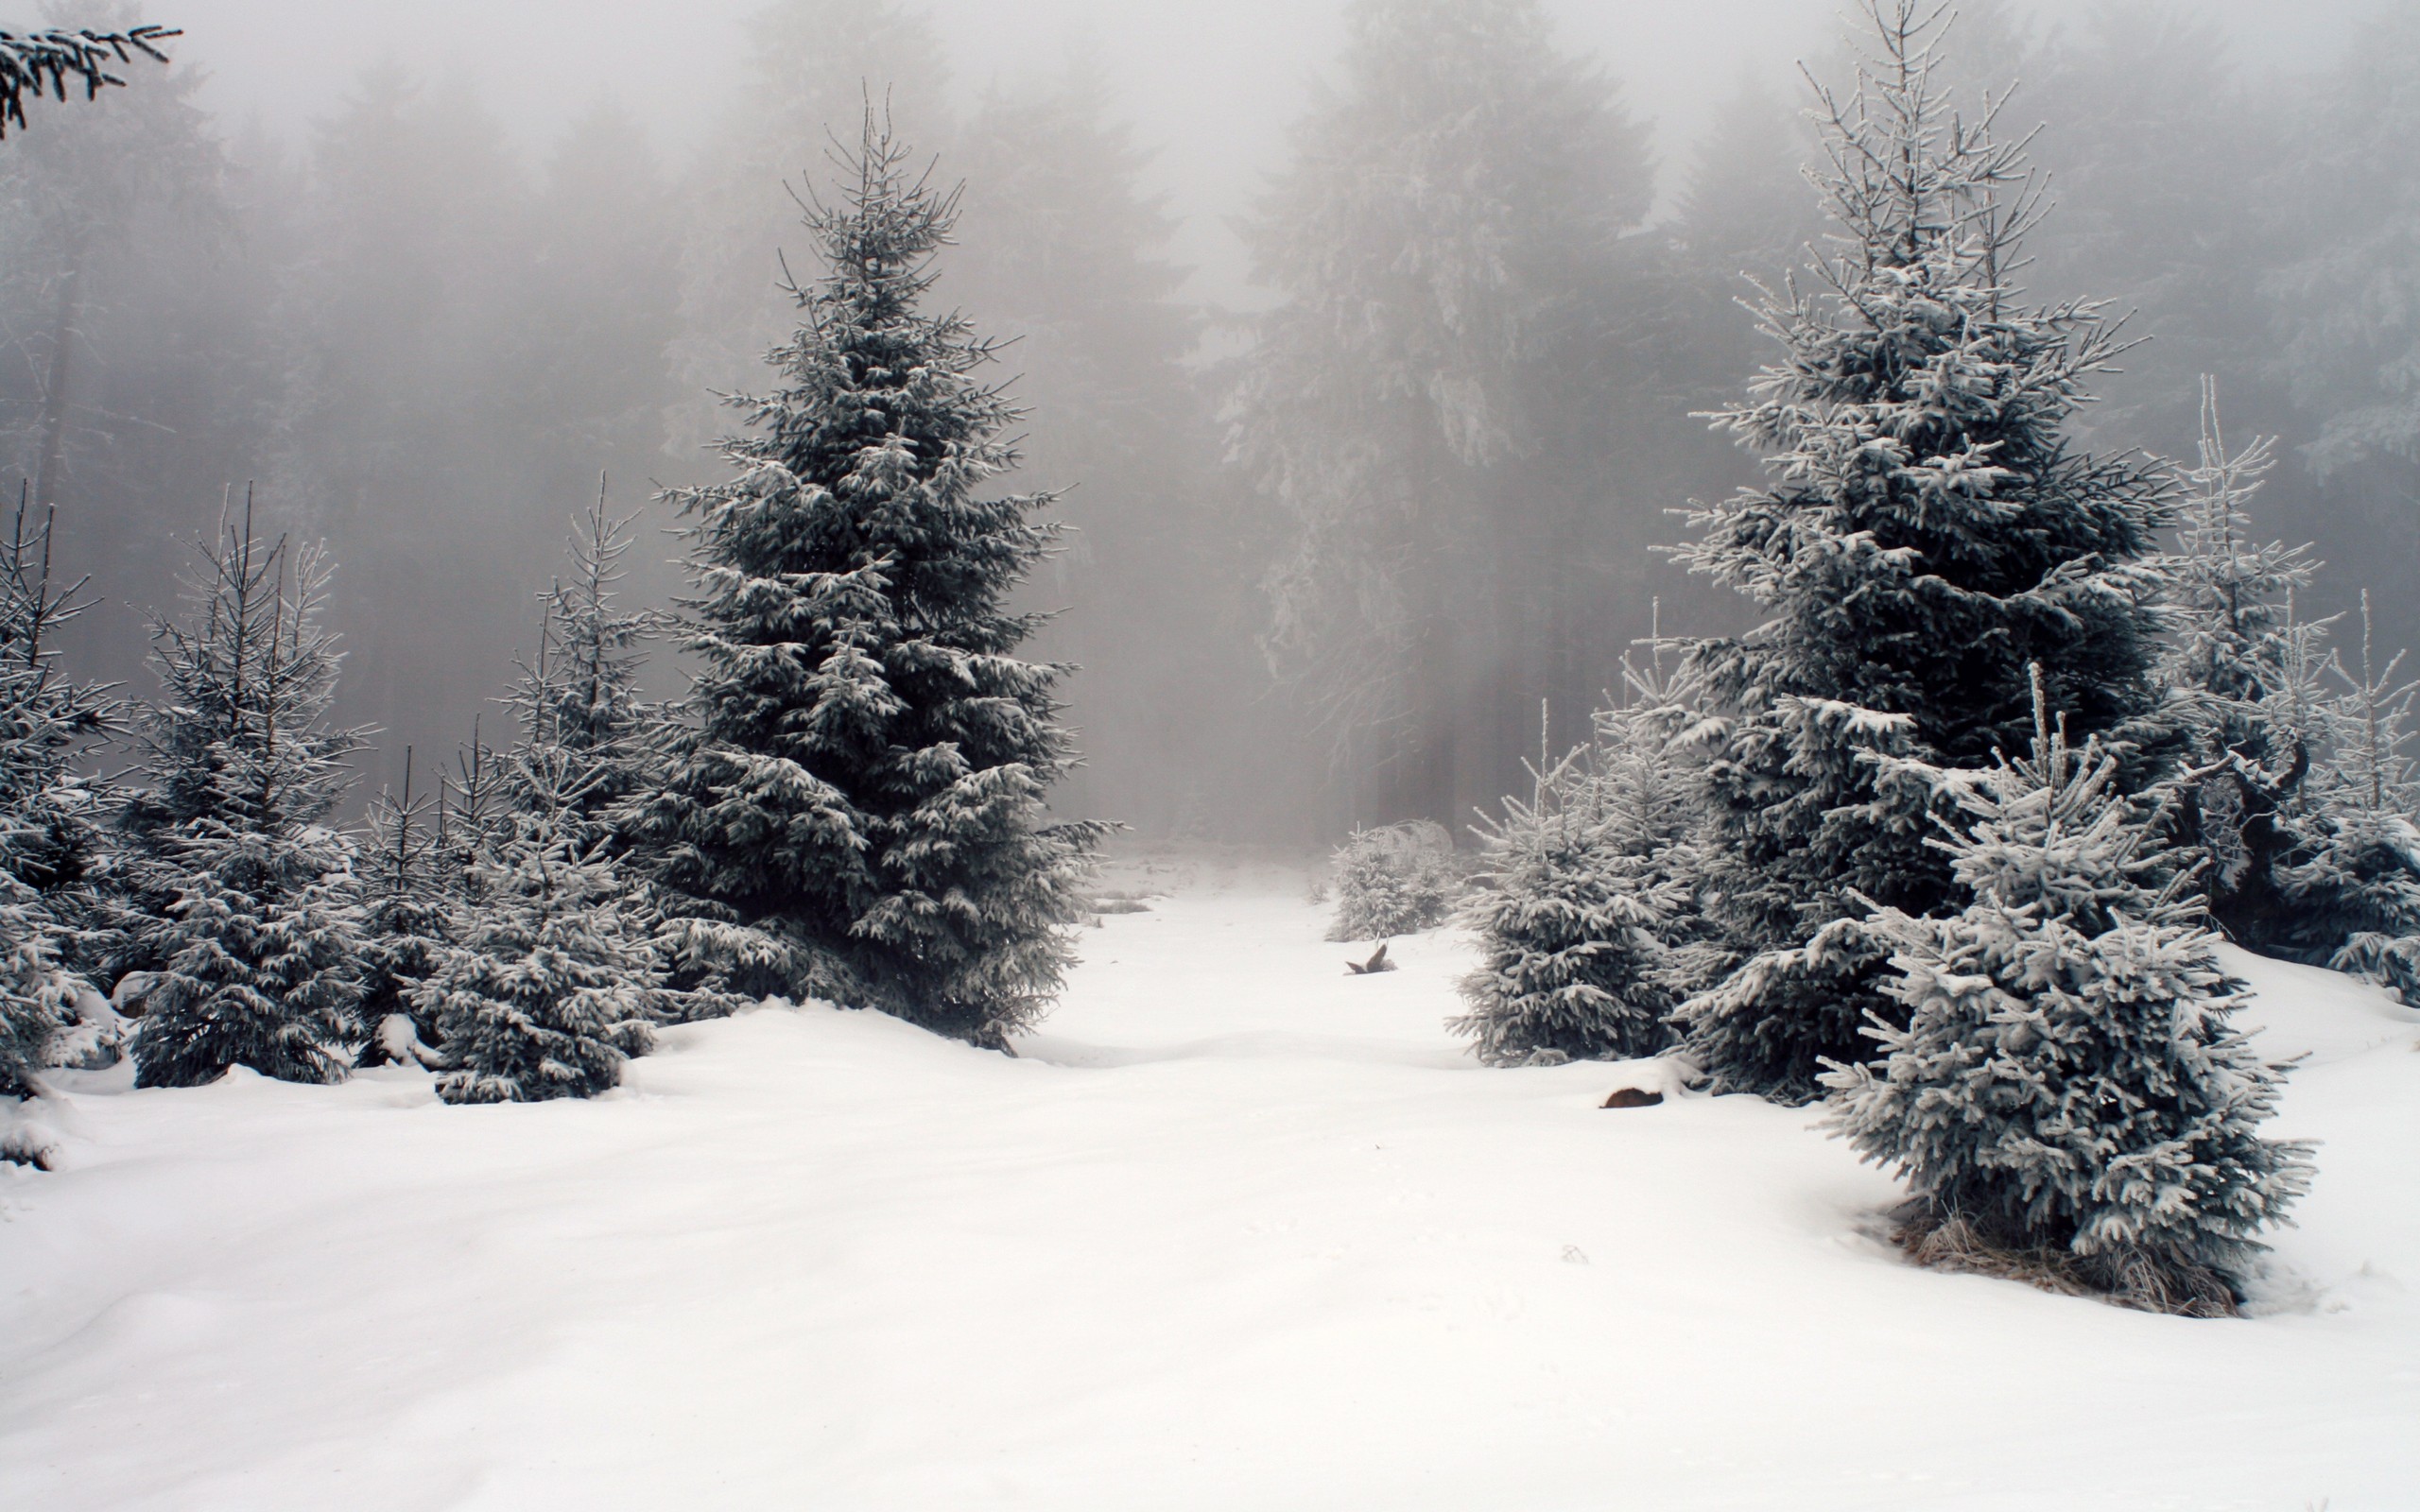 General 2560x1600 nature trees forest snow mist winter cold outdoors